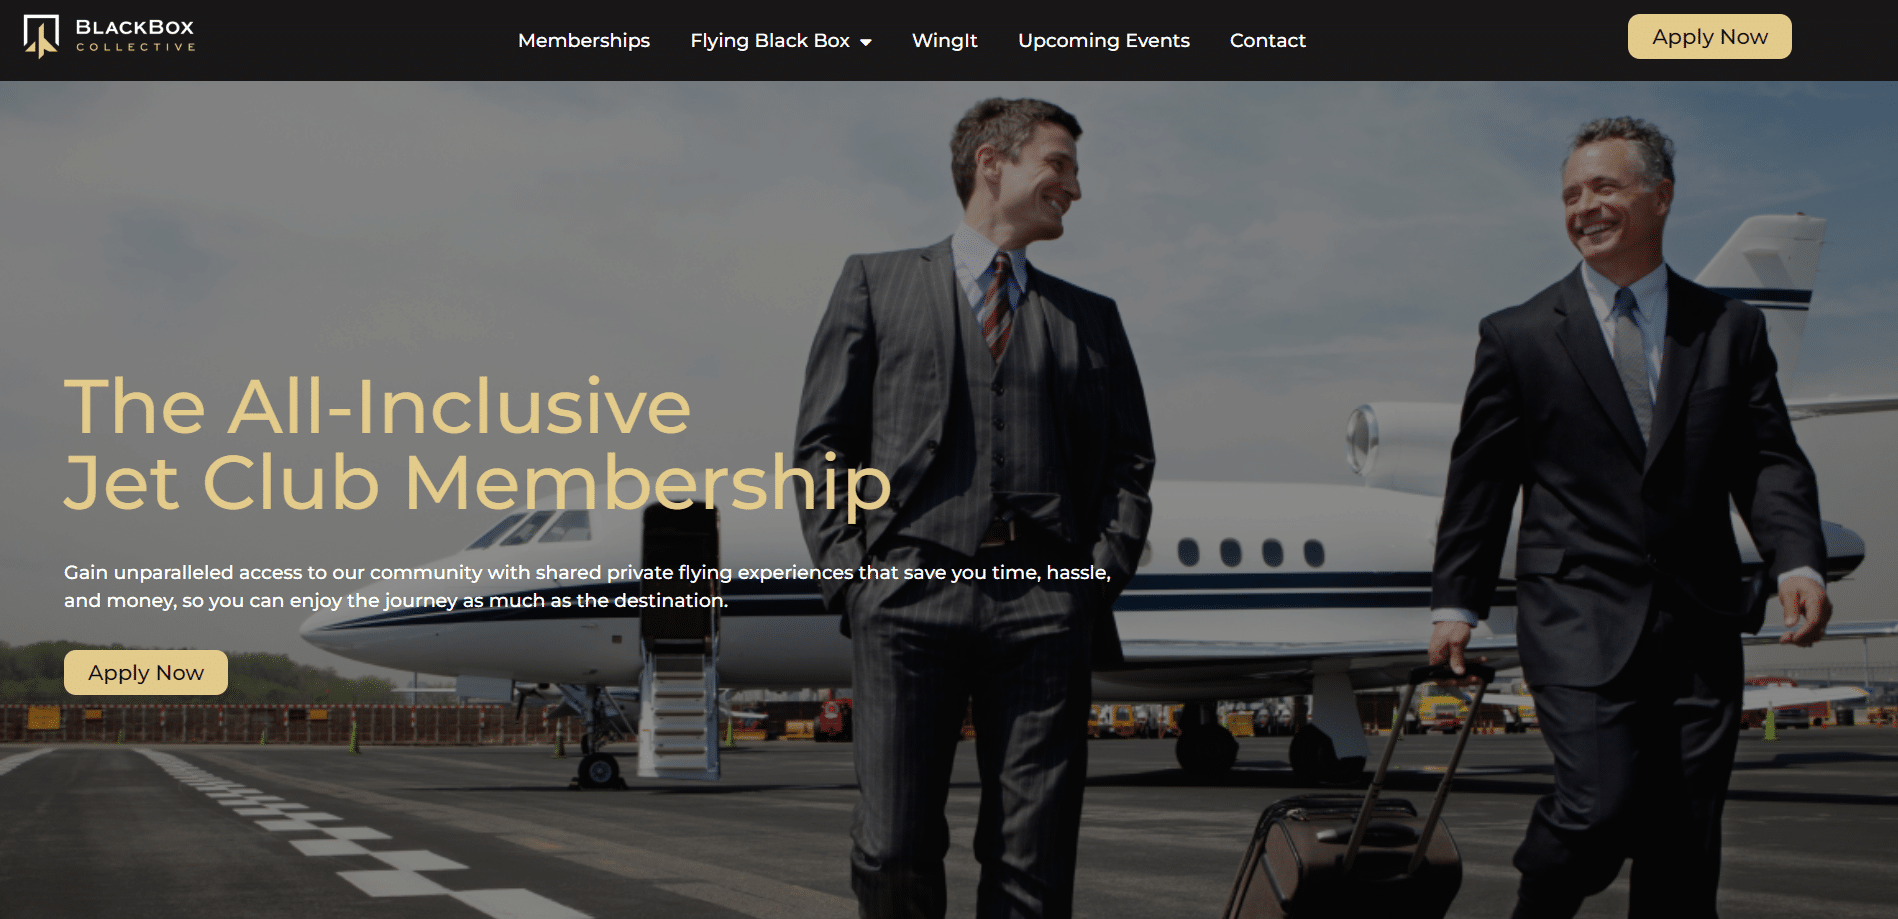 Two businessmen smiling and walking away from a private jet, promoting an all-inclusive jet club membership on their successful website.